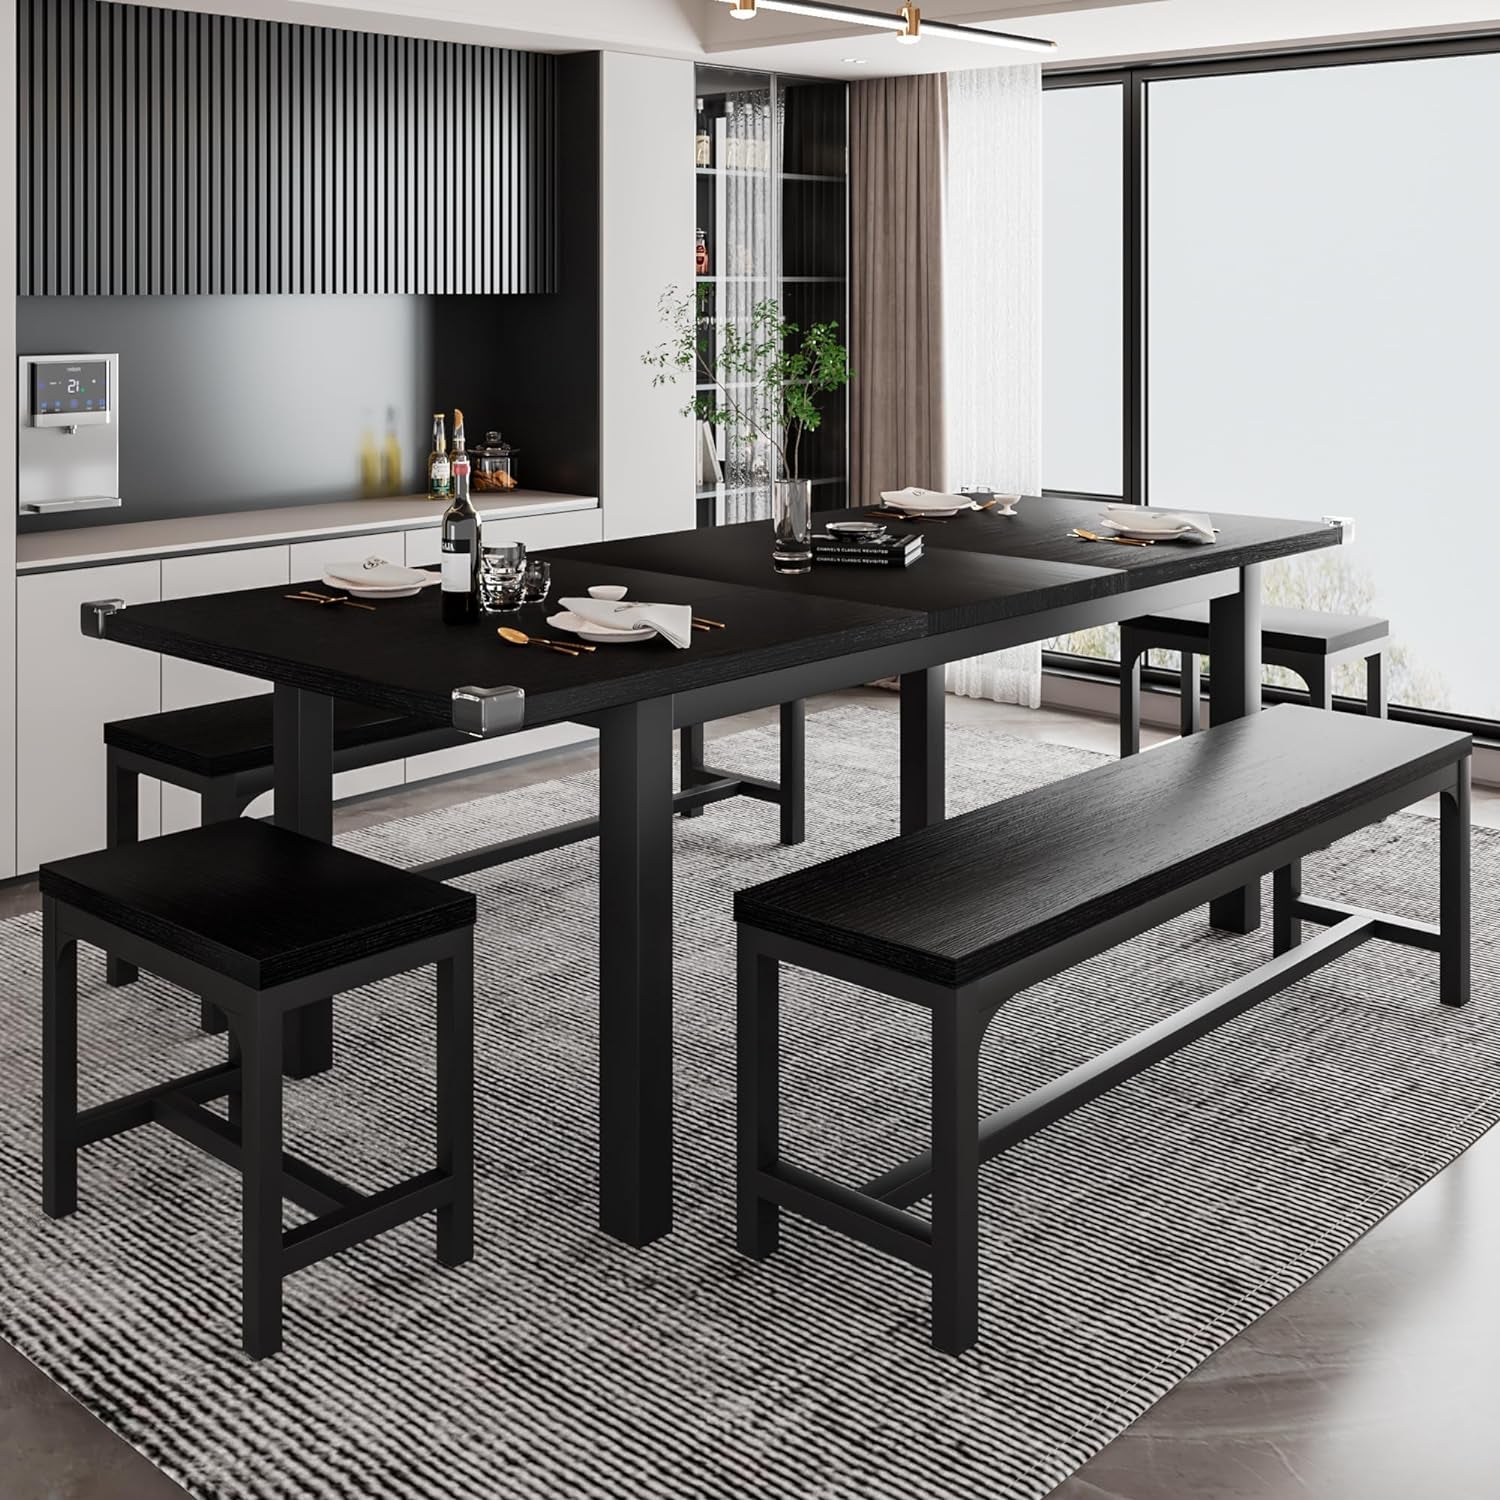 5-Piece Dining Table Set for 4-8 People, Extendable Kitchen Table Set with 2 Benches and 2 Square Stools, Mid-Century Dining Room Table with Metal Frame & MDF Board, Saving Space, Black